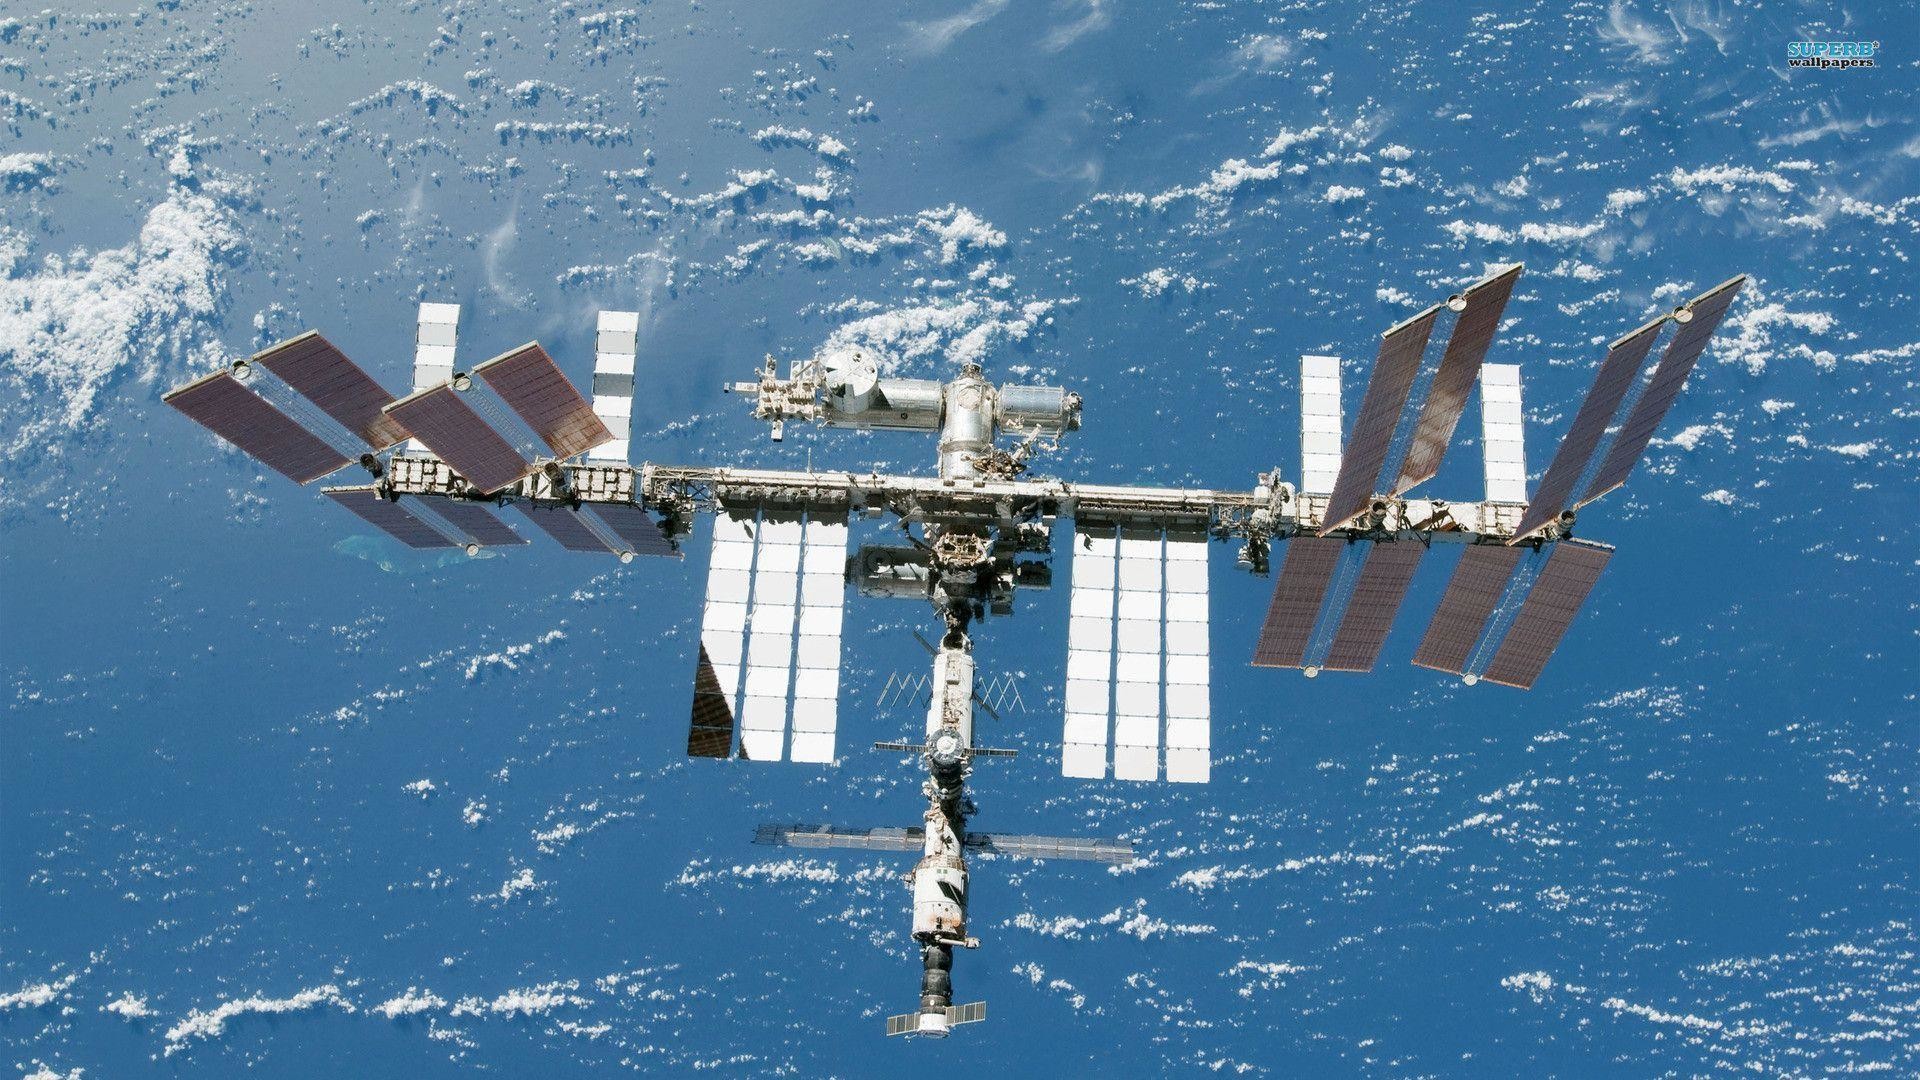 1920x1080 International Space Station wallpaper - Space wallpapers - #